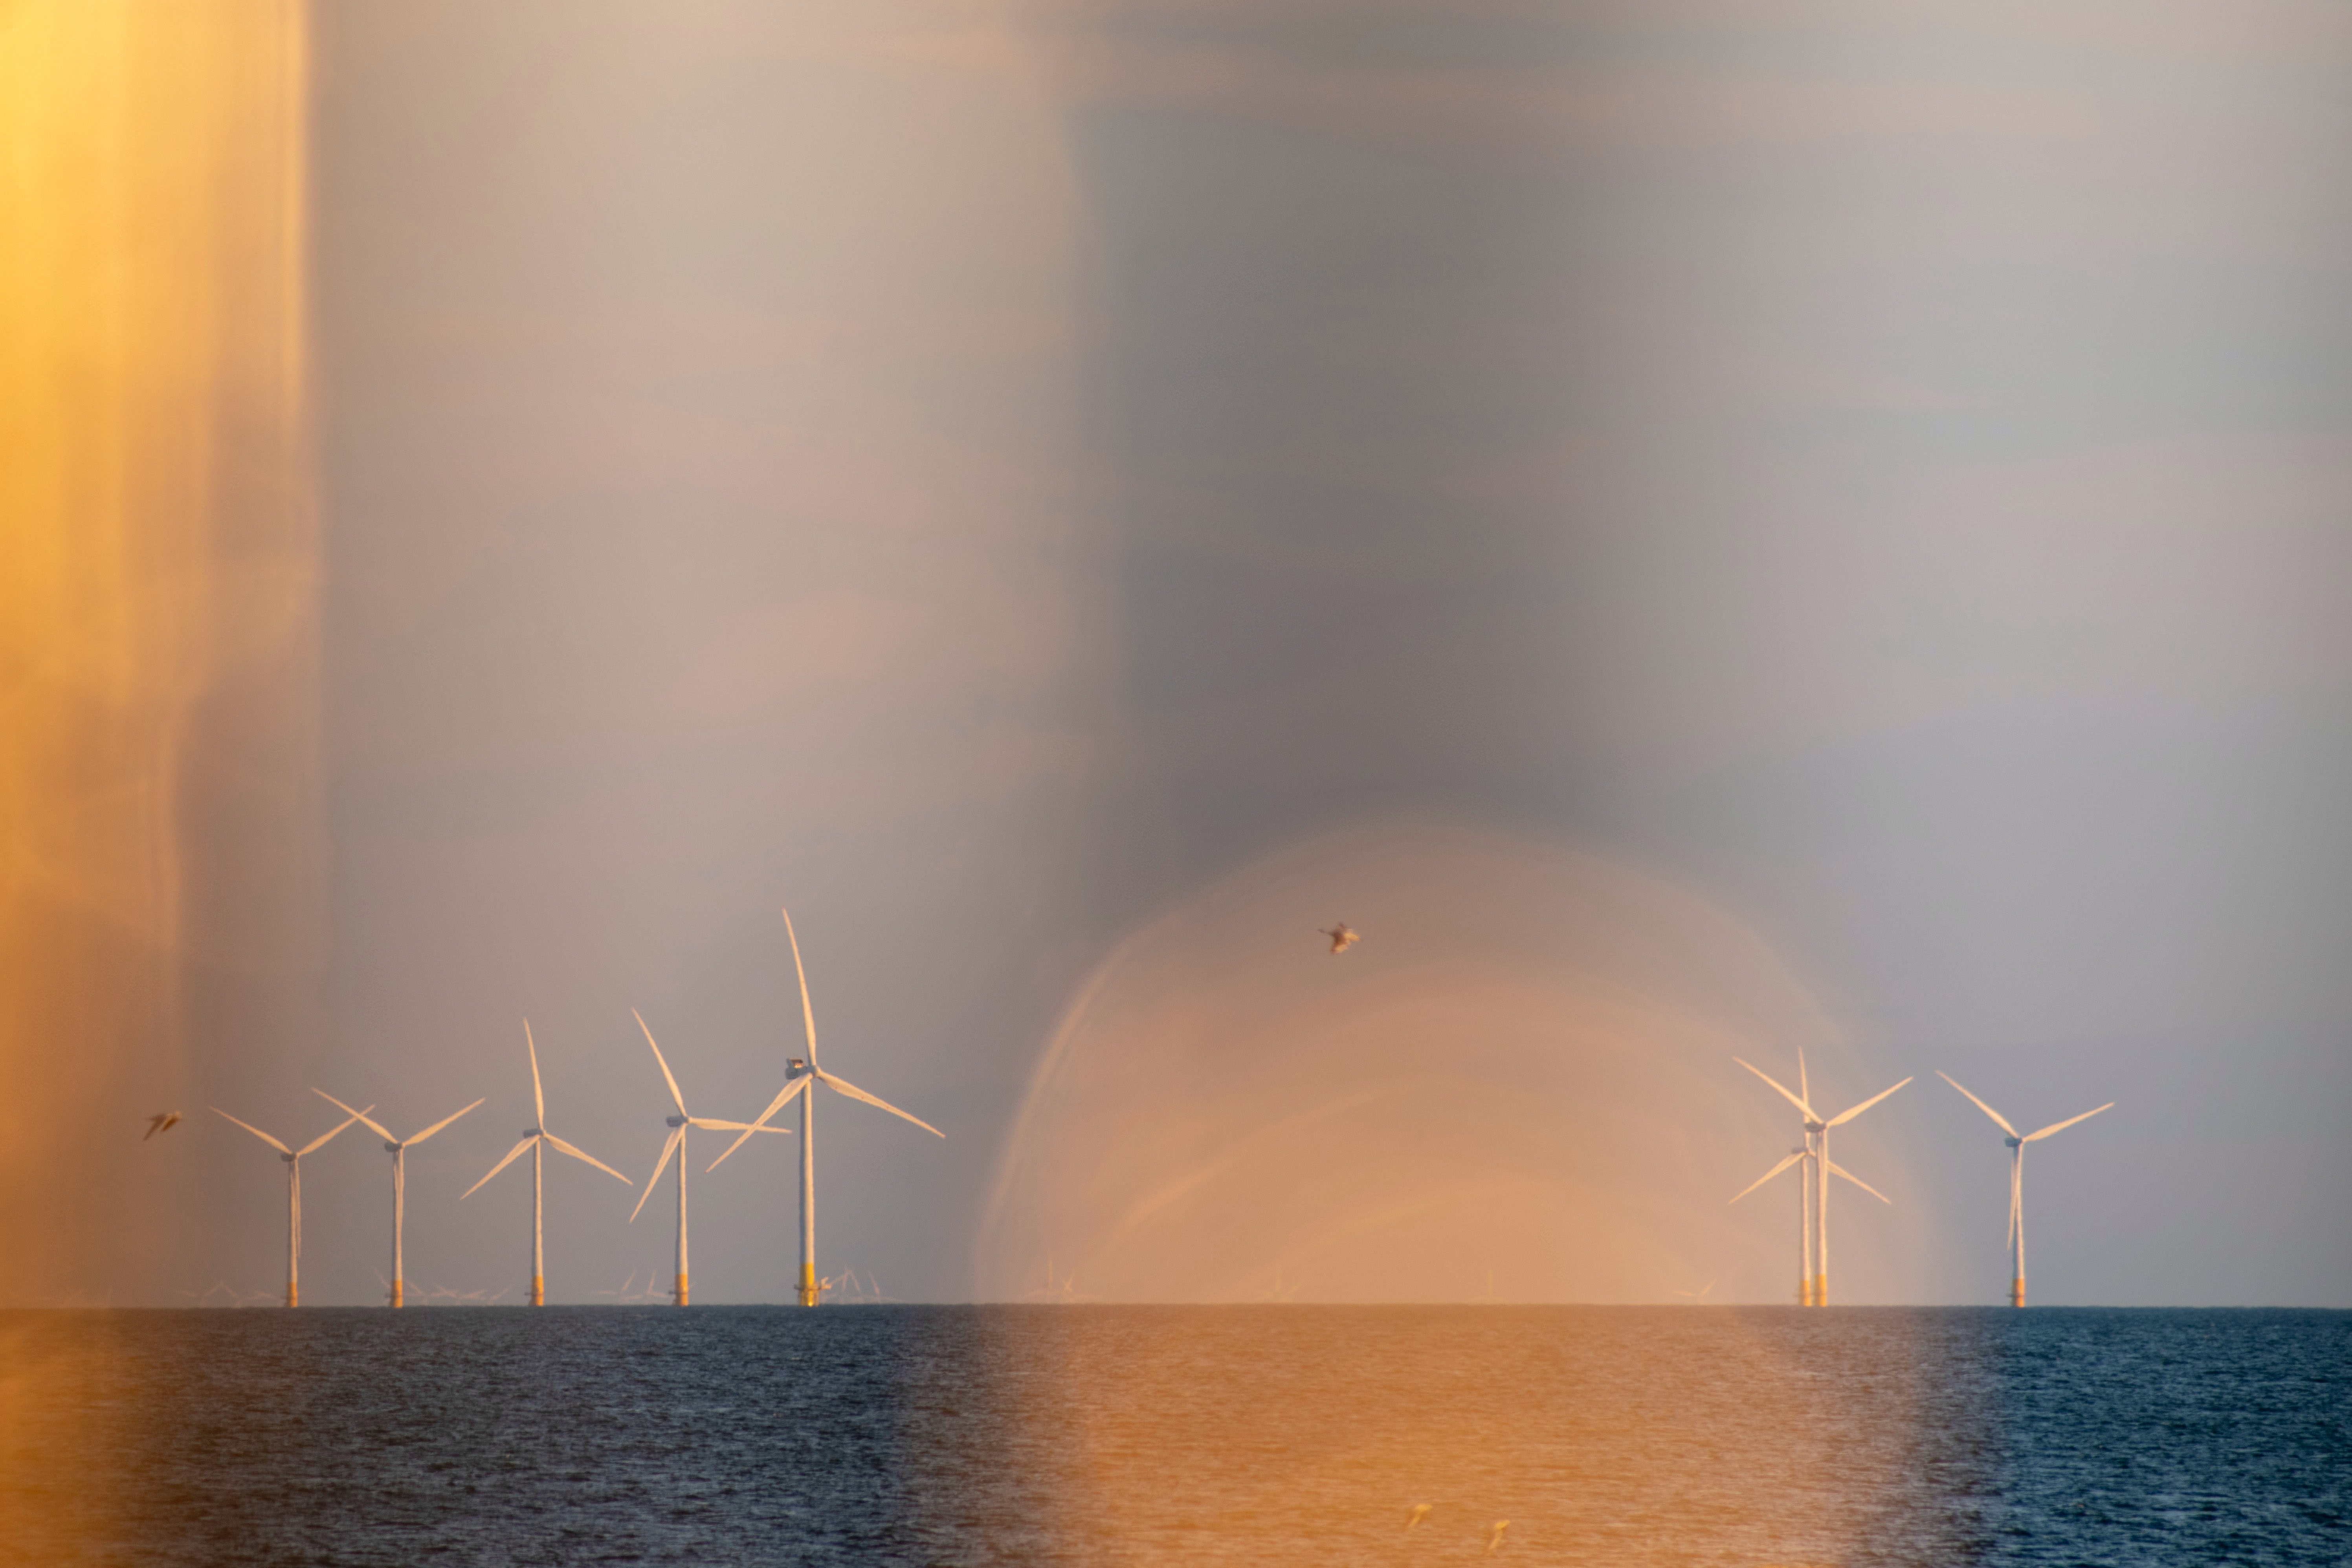 ian-simpson-N-RfoK4y-0-unsplash-2 The East Anglia ONE offshore wind farm comes into operation  